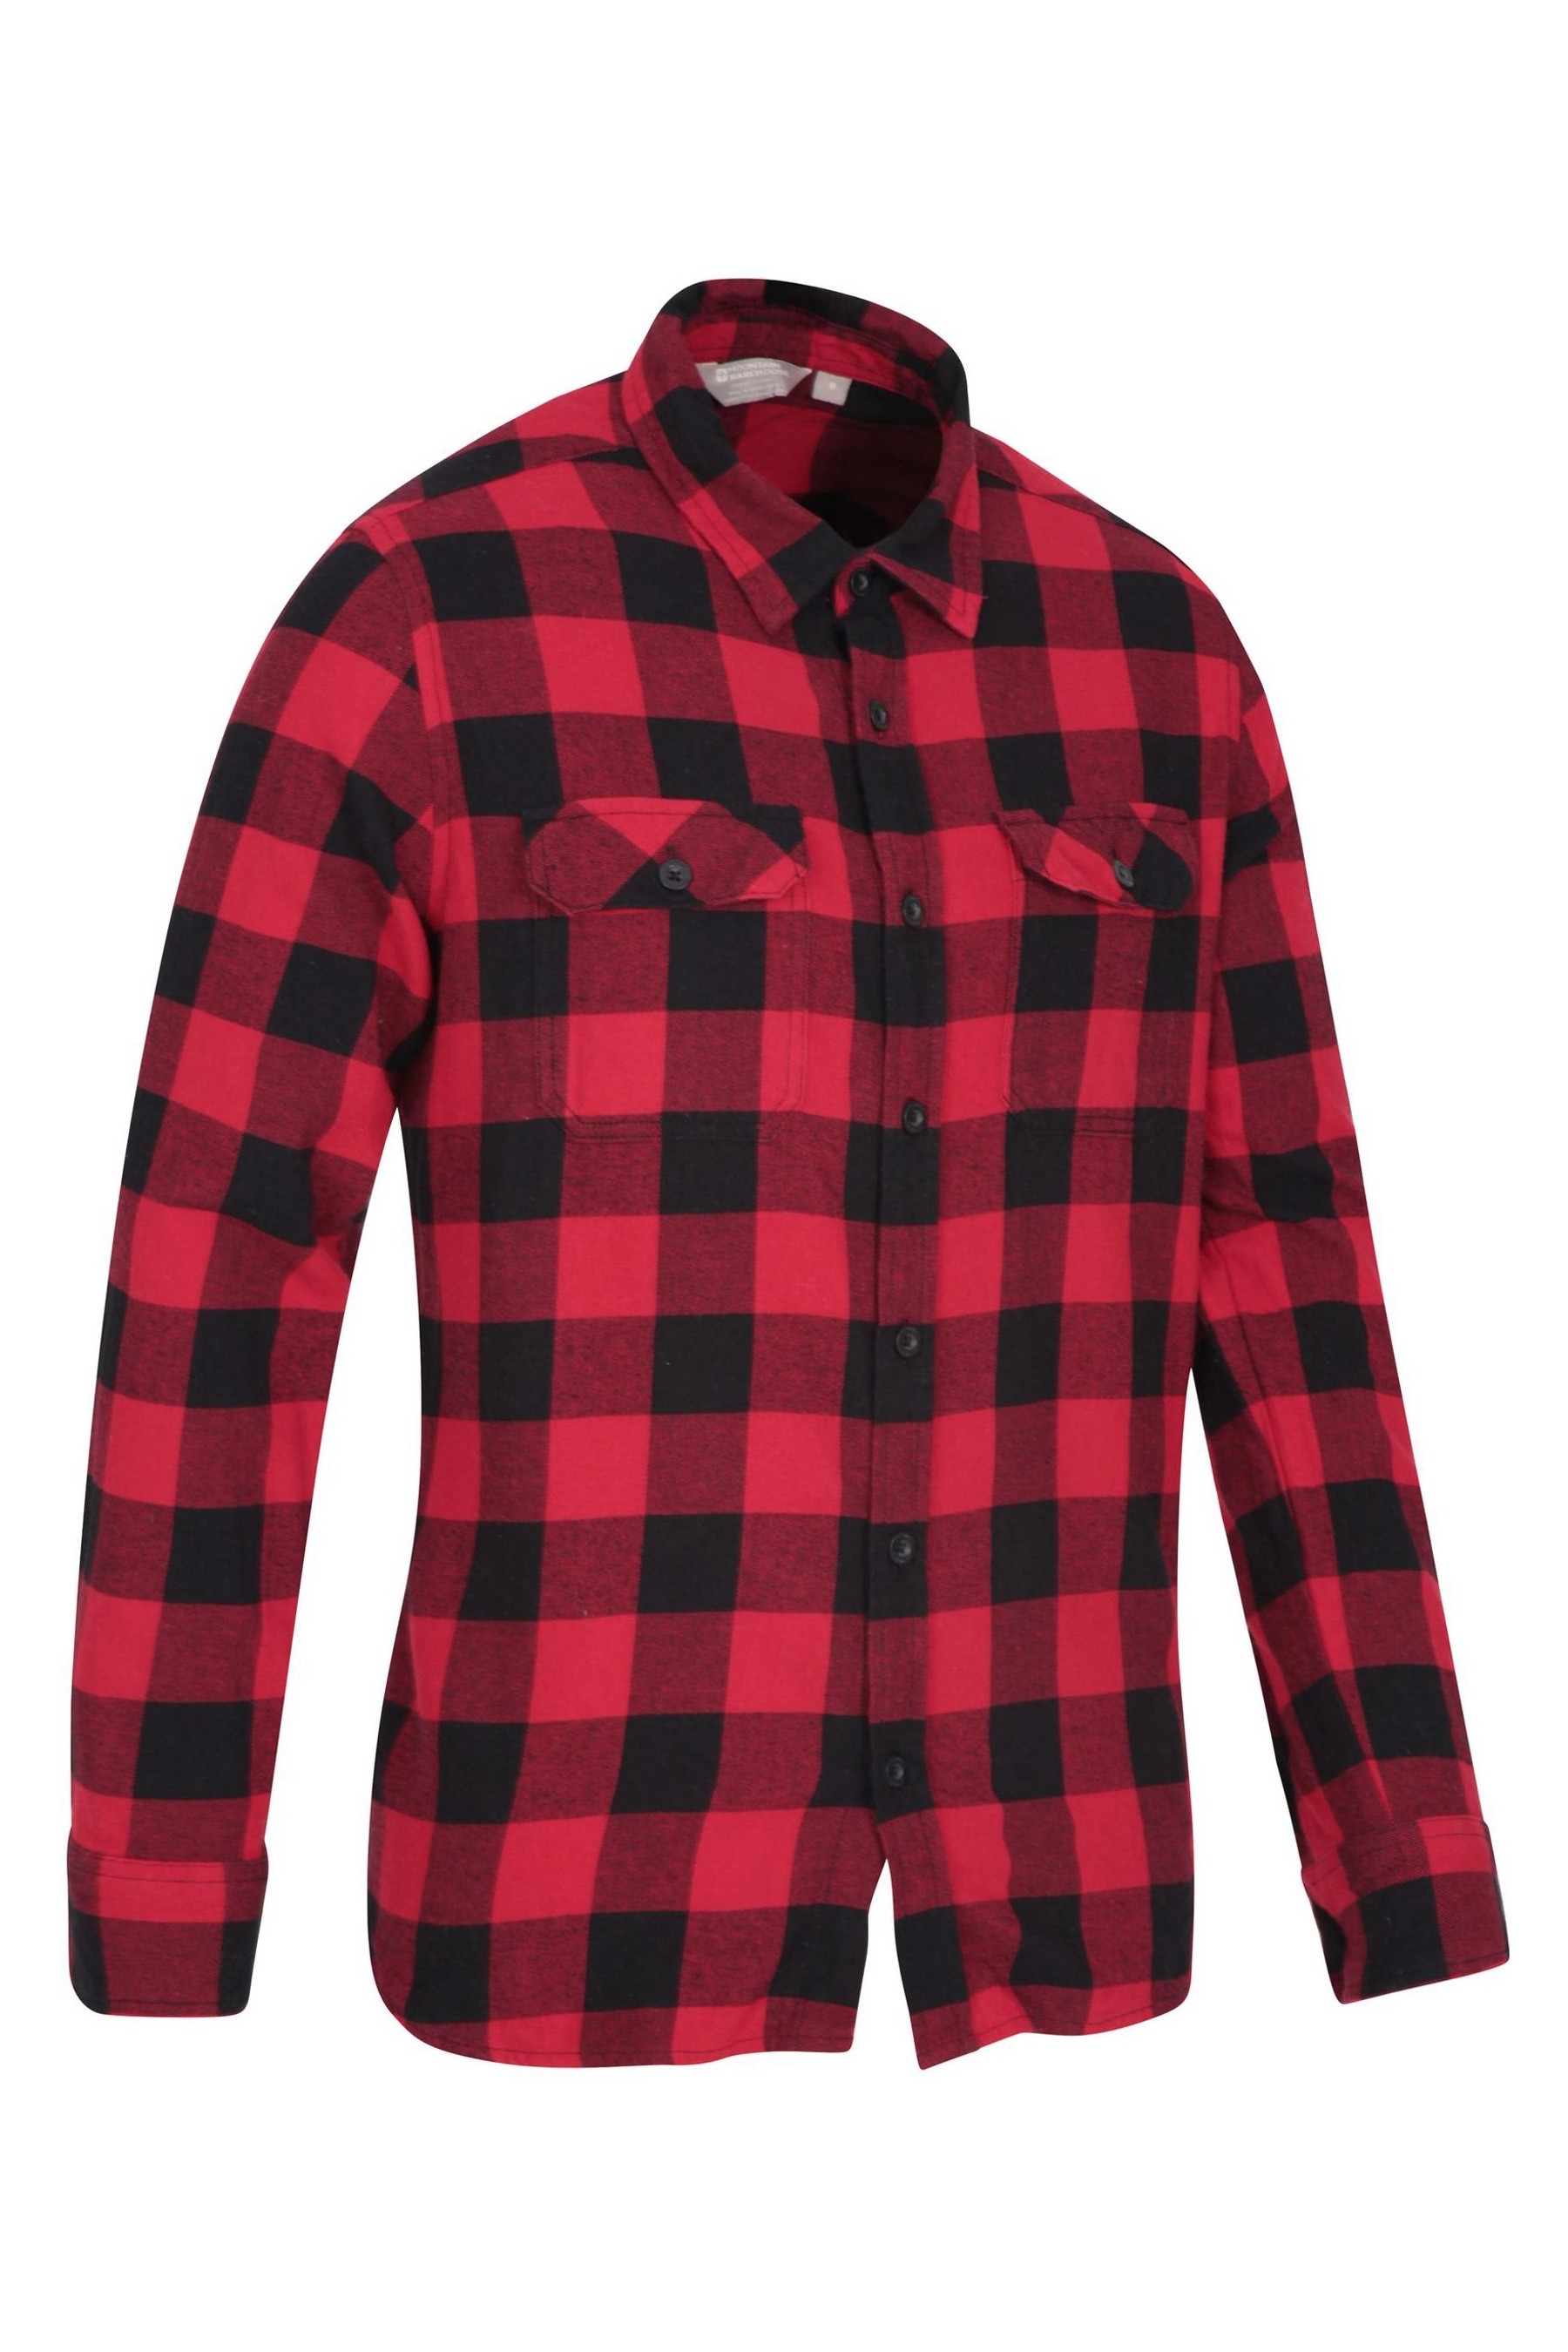 Buy Mountain Warehouse Red and Black Trace Mens Flannel Long Sleeve ...